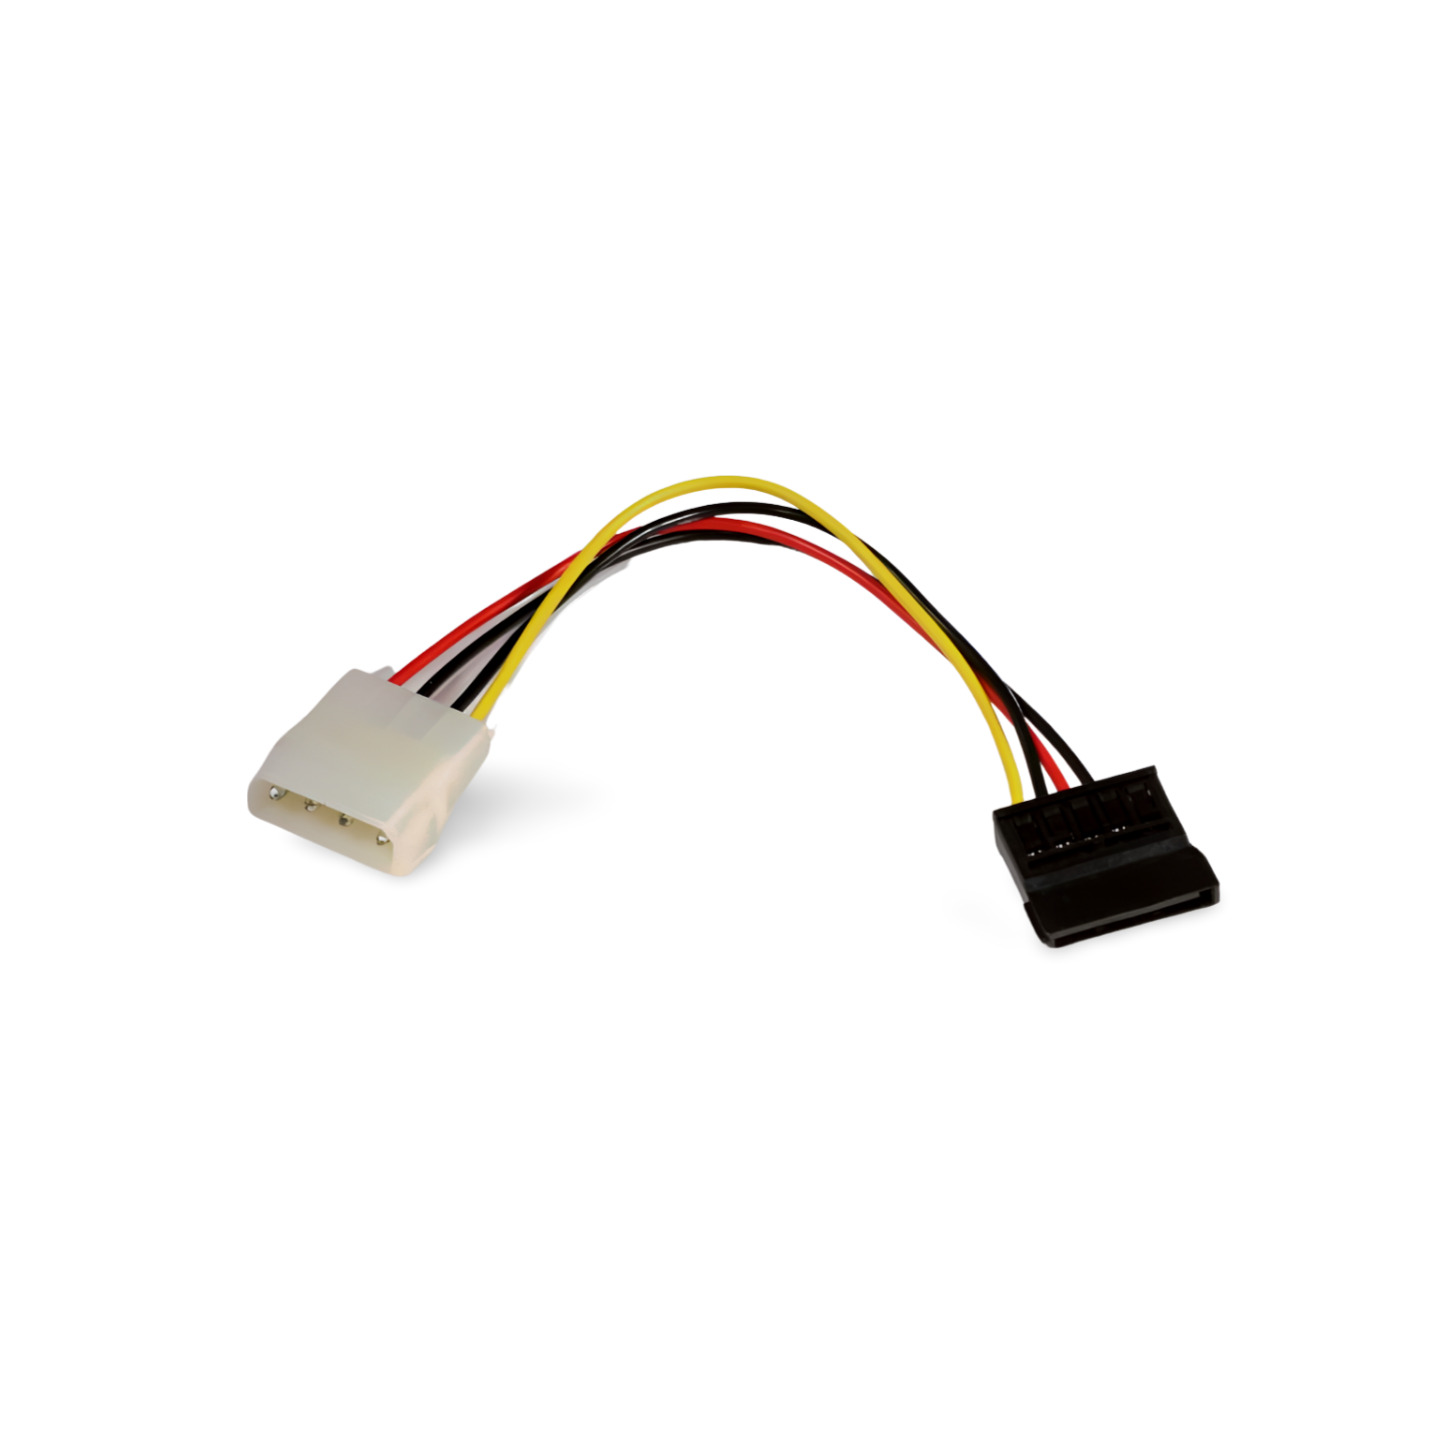 6in Sata Power Cable Connector - Multi